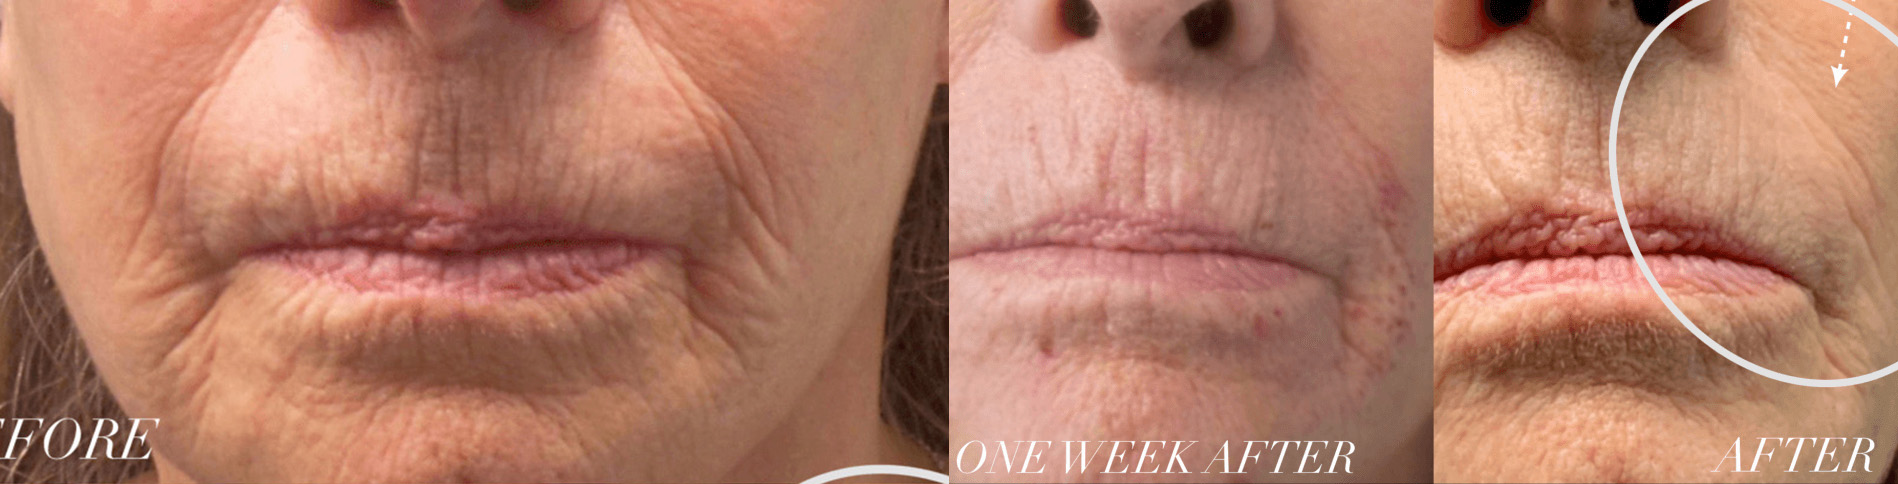 Plasma Resurfacing with the Subnovii Pen Before and After Photo by Dr. Frank in New York, NY